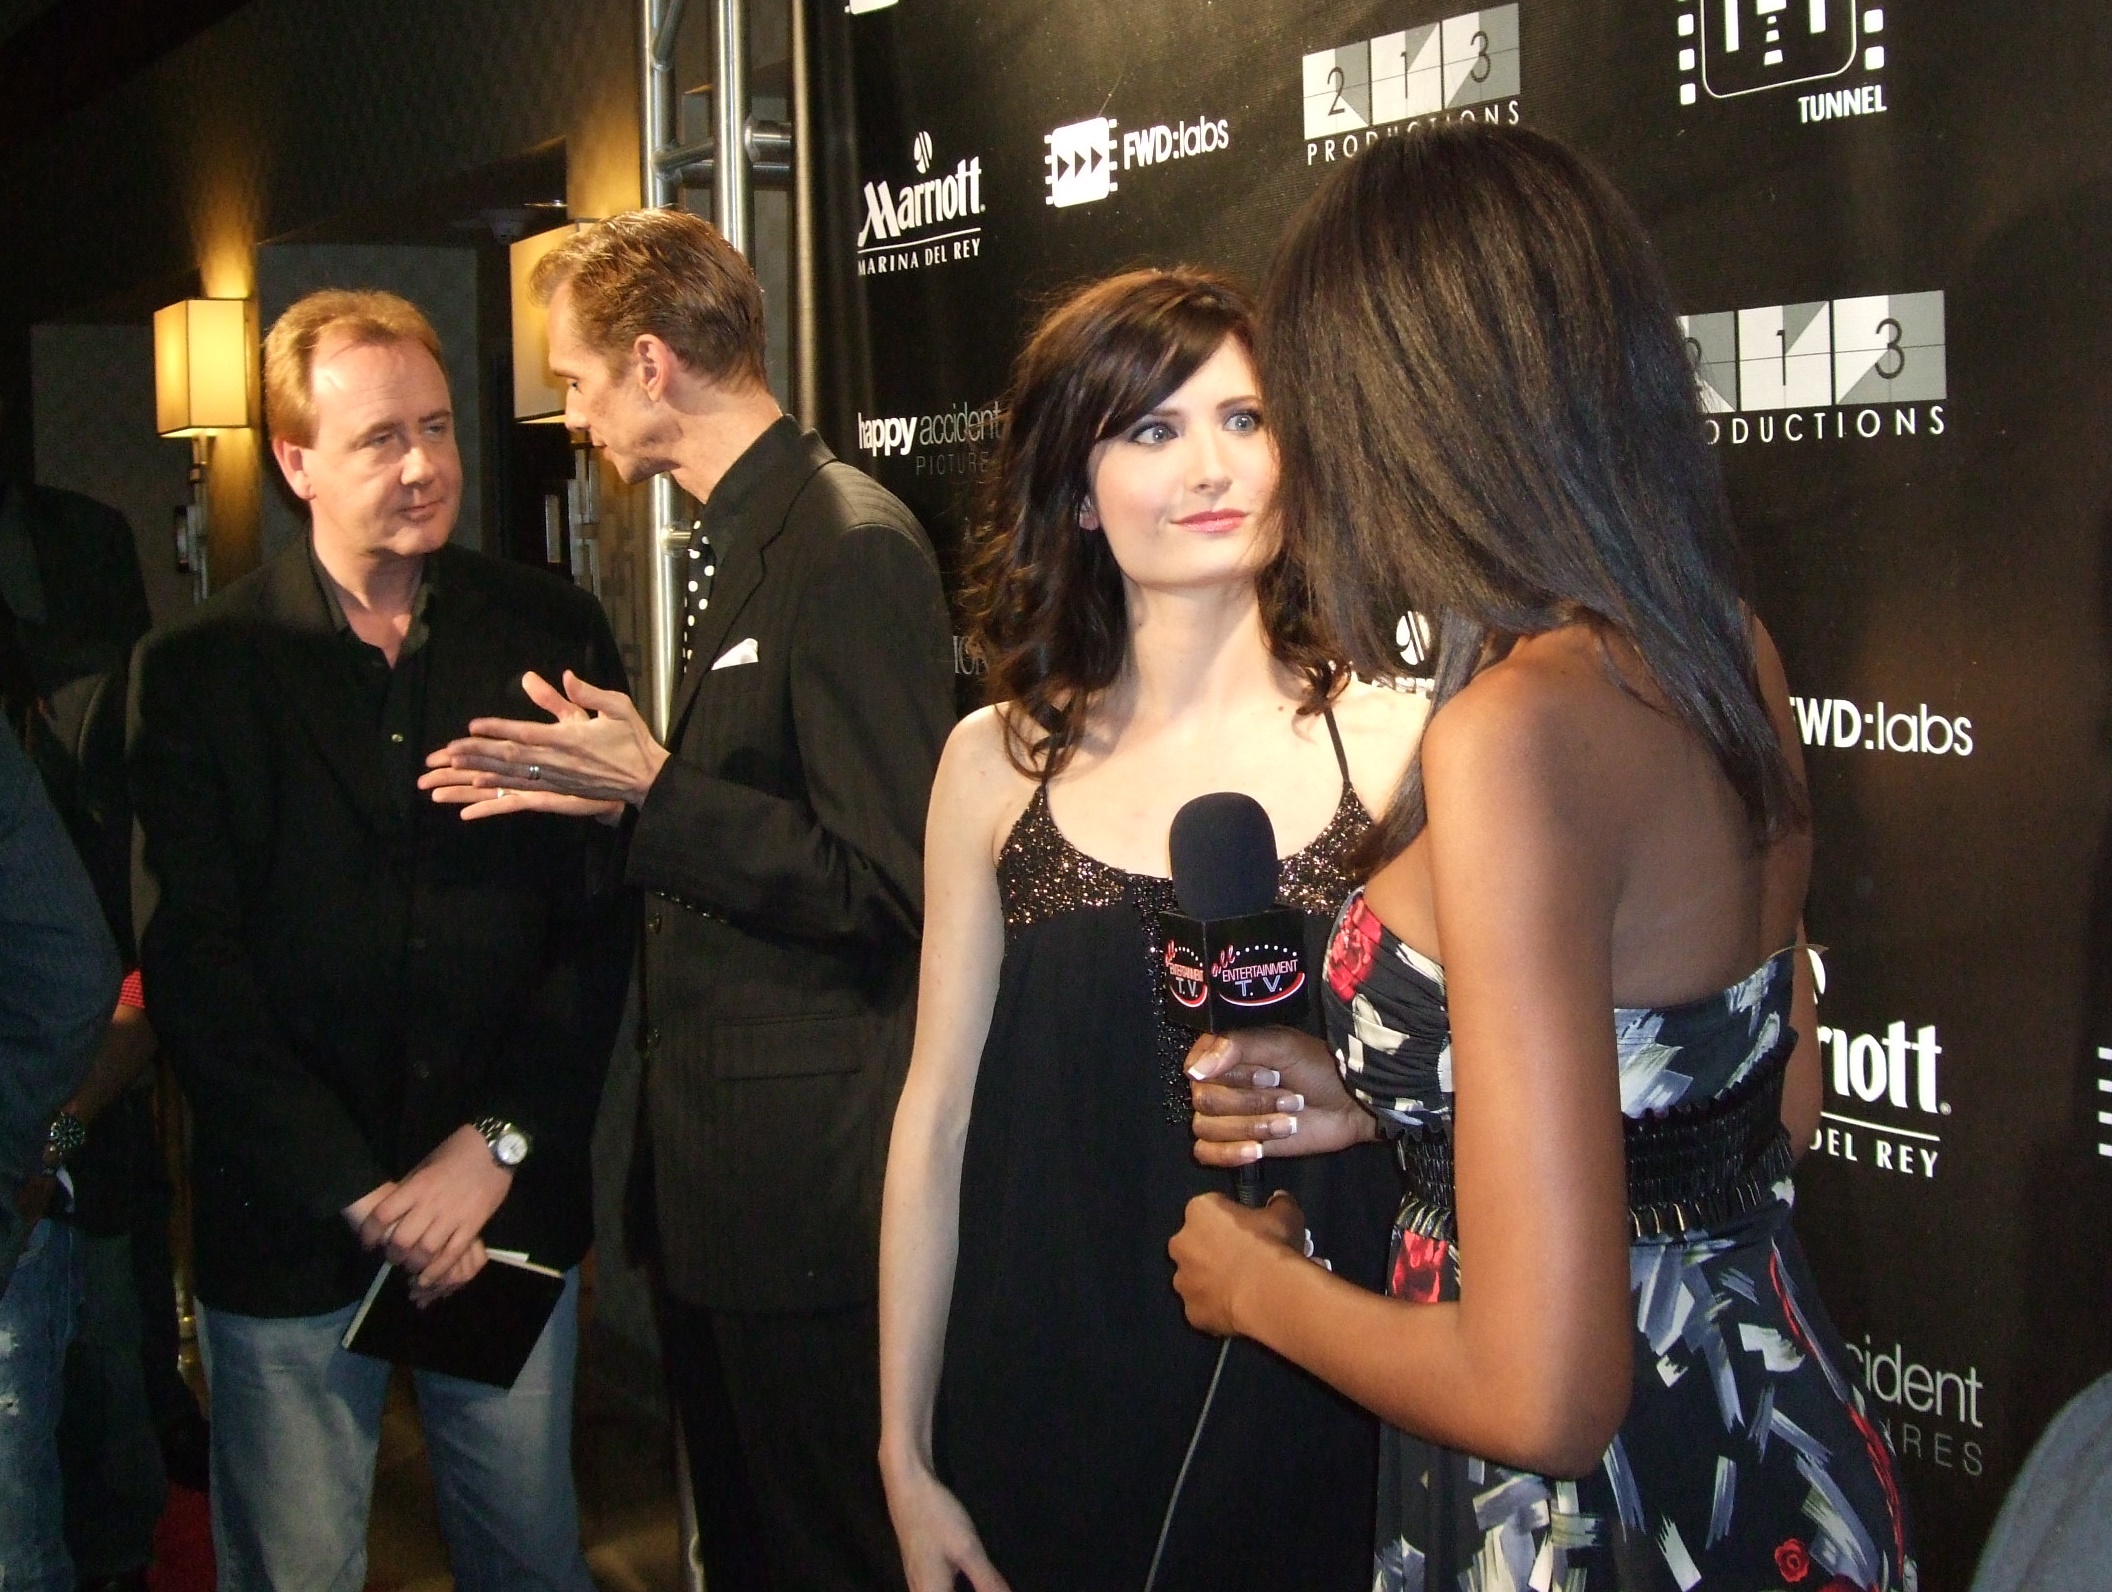 Jill Jordan being interviewed on the red carpet about her film, 